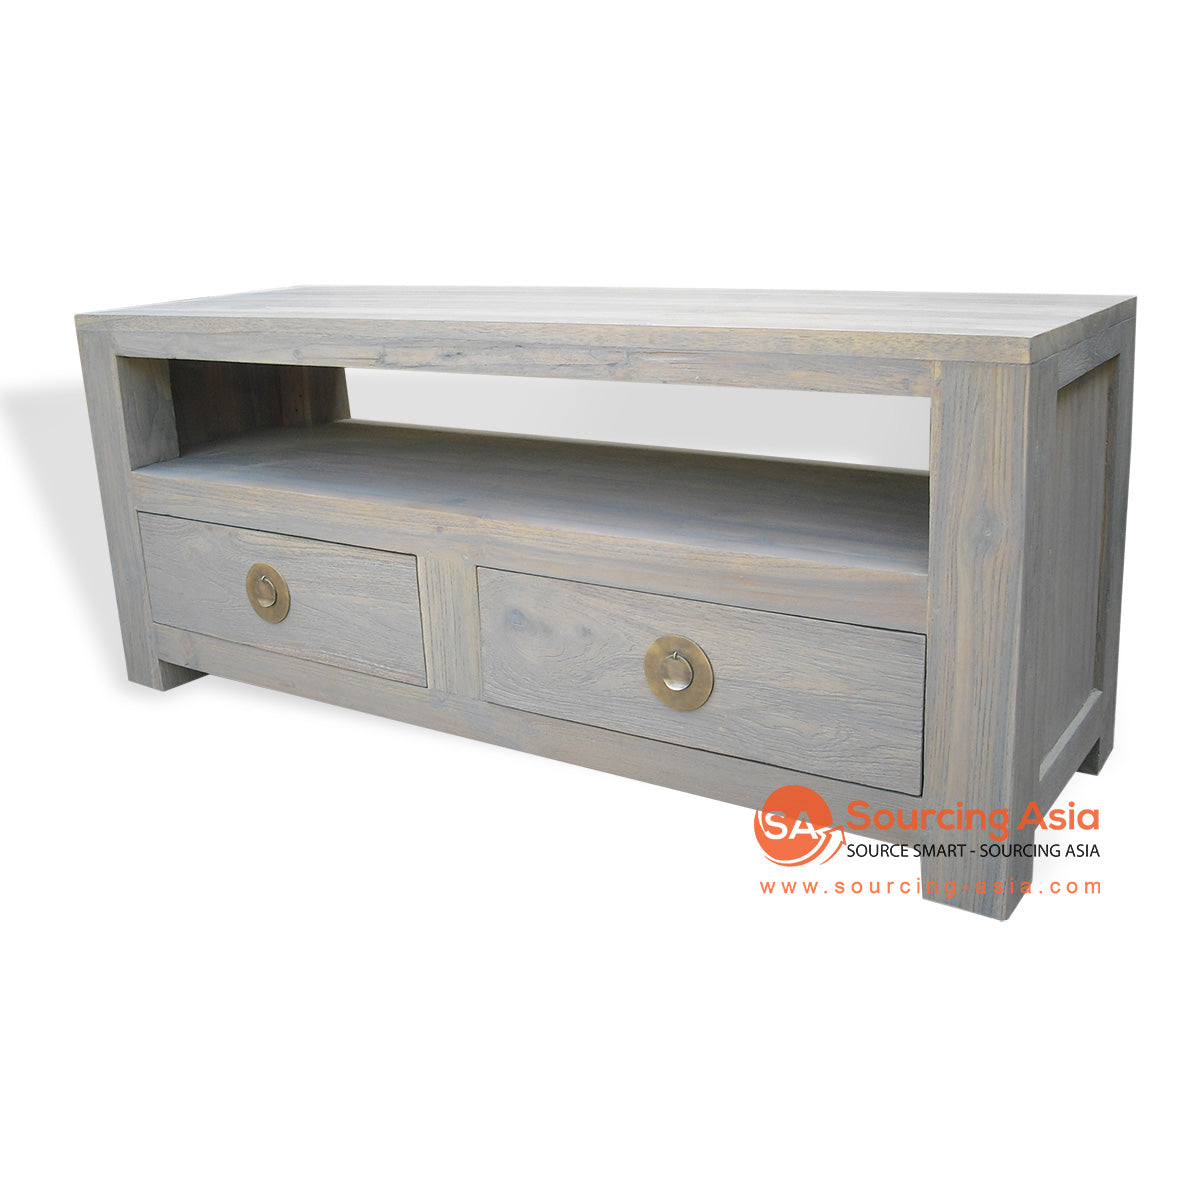 KYT80001-120 WHITE WASH RECYCLED TEAK WOOD TWO DRAWERS SMALL ENTERTAINMENT UNIT